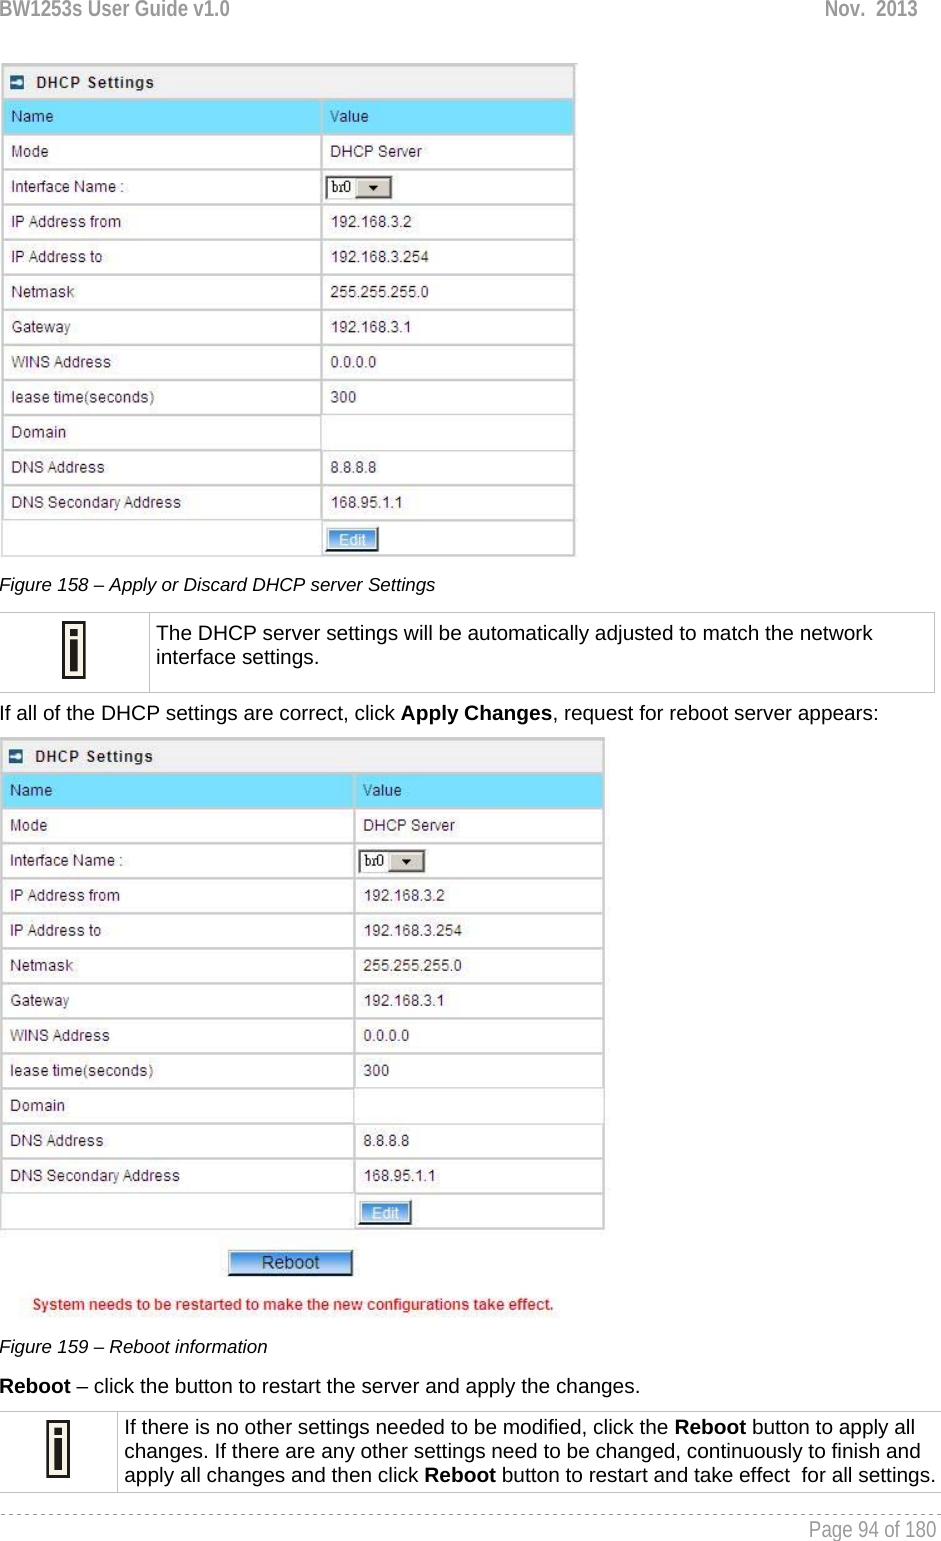 BW1253s User Guide v1.0  Nov.  2013     Page 94 of 180    Figure 158 – Apply or Discard DHCP server Settings  The DHCP server settings will be automatically adjusted to match the network interface settings. If all of the DHCP settings are correct, click Apply Changes, request for reboot server appears:  Figure 159 – Reboot information Reboot – click the button to restart the server and apply the changes.  If there is no other settings needed to be modified, click the Reboot button to apply all changes. If there are any other settings need to be changed, continuously to finish and apply all changes and then click Reboot button to restart and take effect  for all settings.